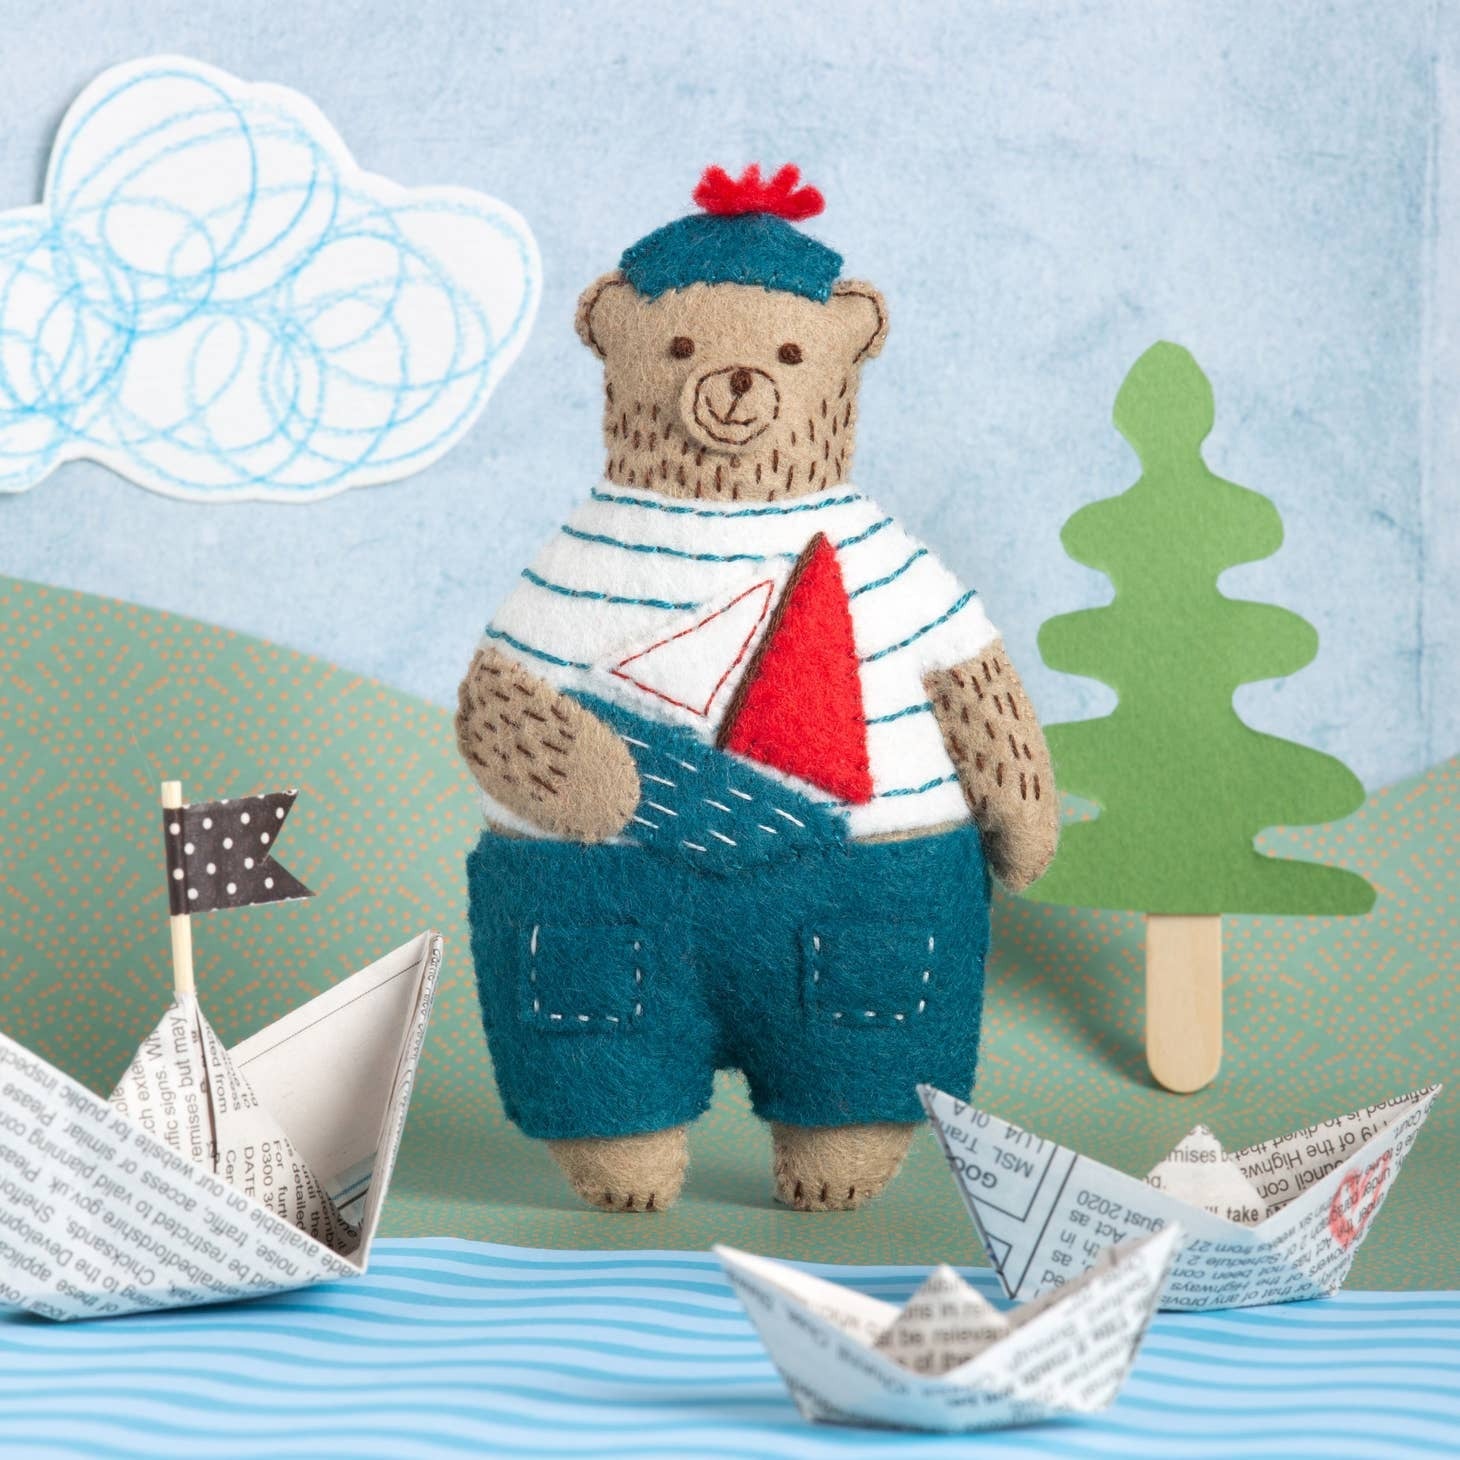 Felted Marcel the Sailor Bear in striped shirt with paper boats and felt trees on a blue background.